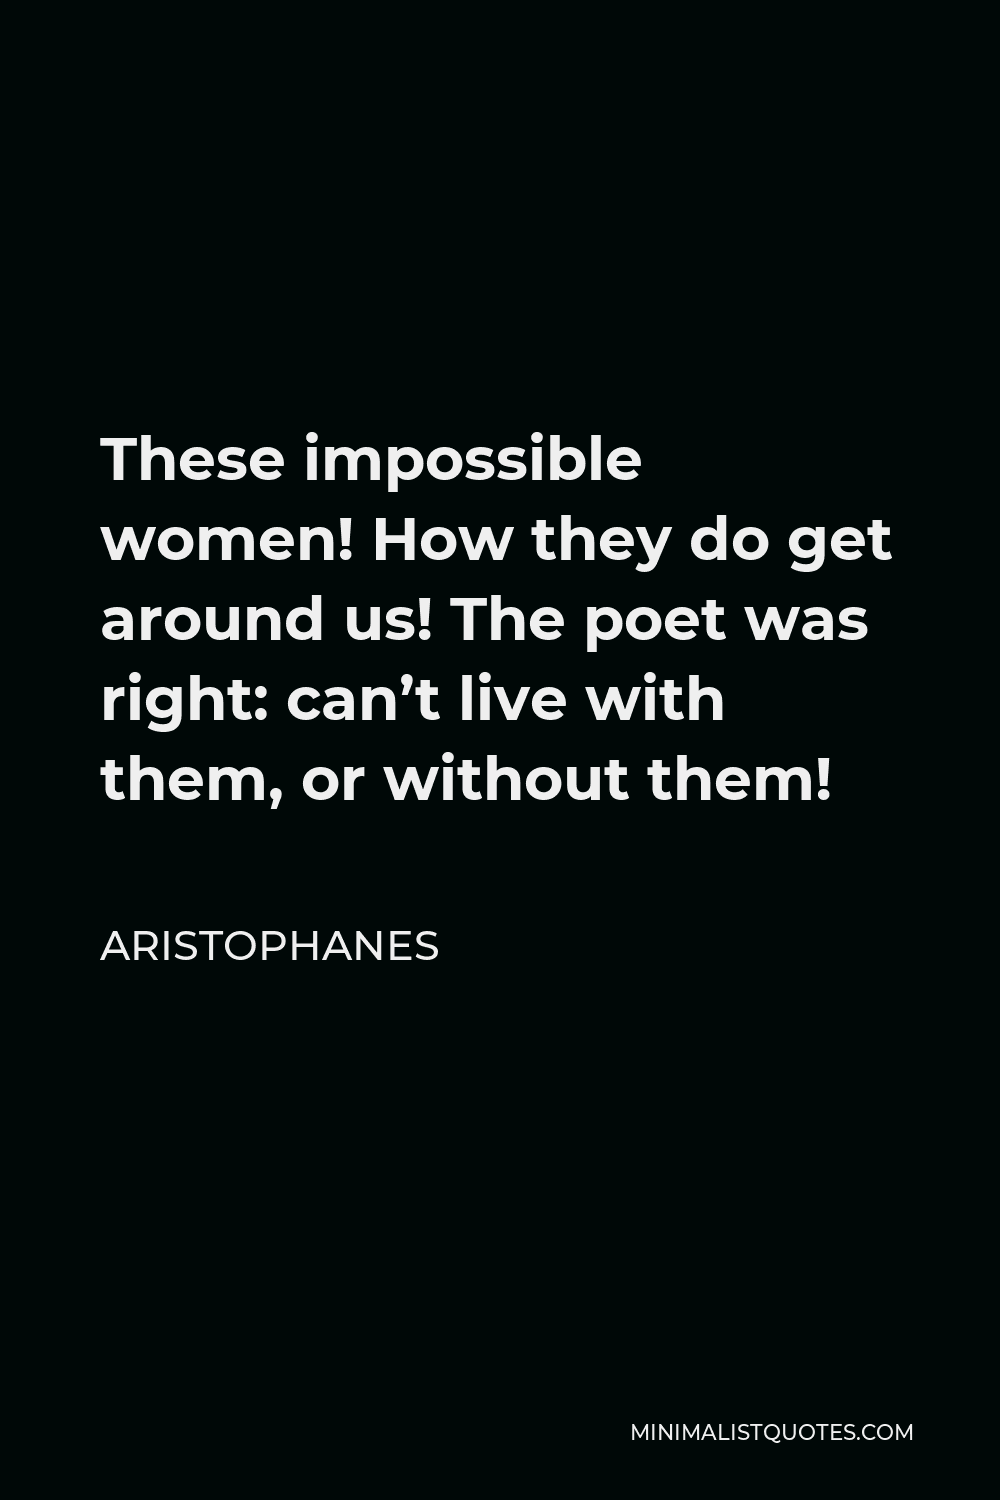 Aristophanes Quote - These impossible women! How they do get around us! The poet was right: can’t live with them, or without them!